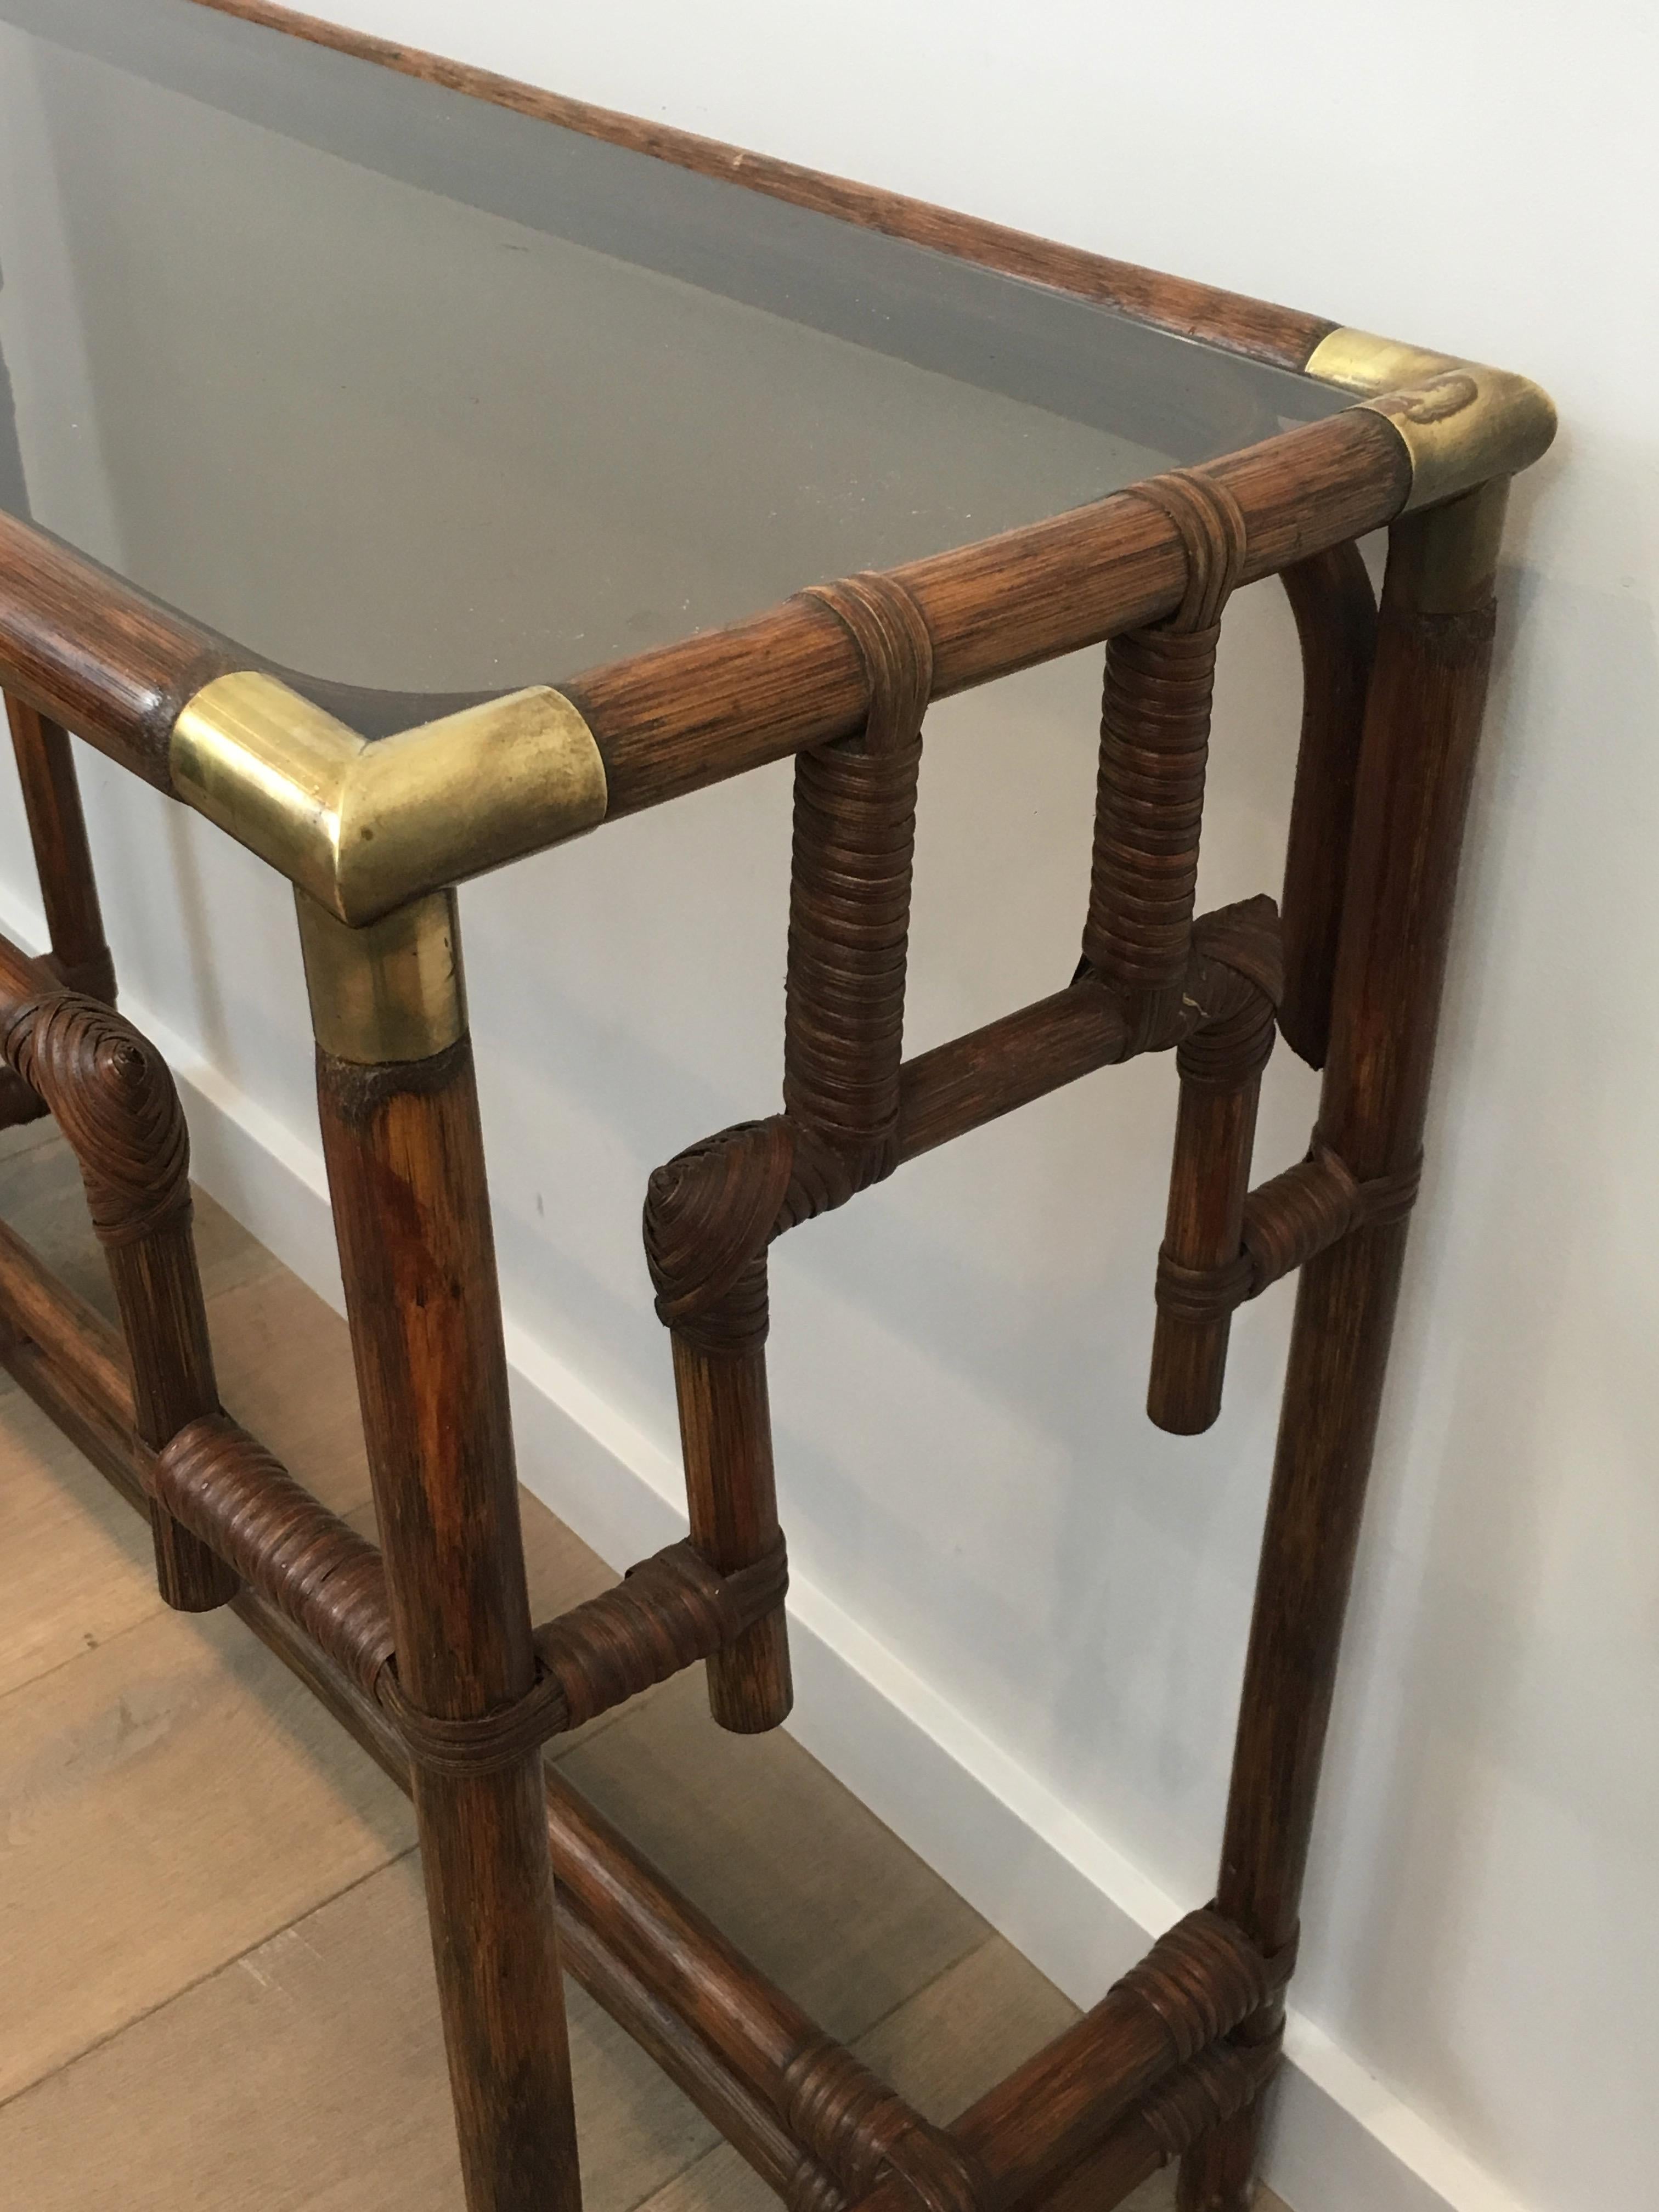 Bamboo Console Table with Brass Corners and Smoked Glass Shelf, French 1